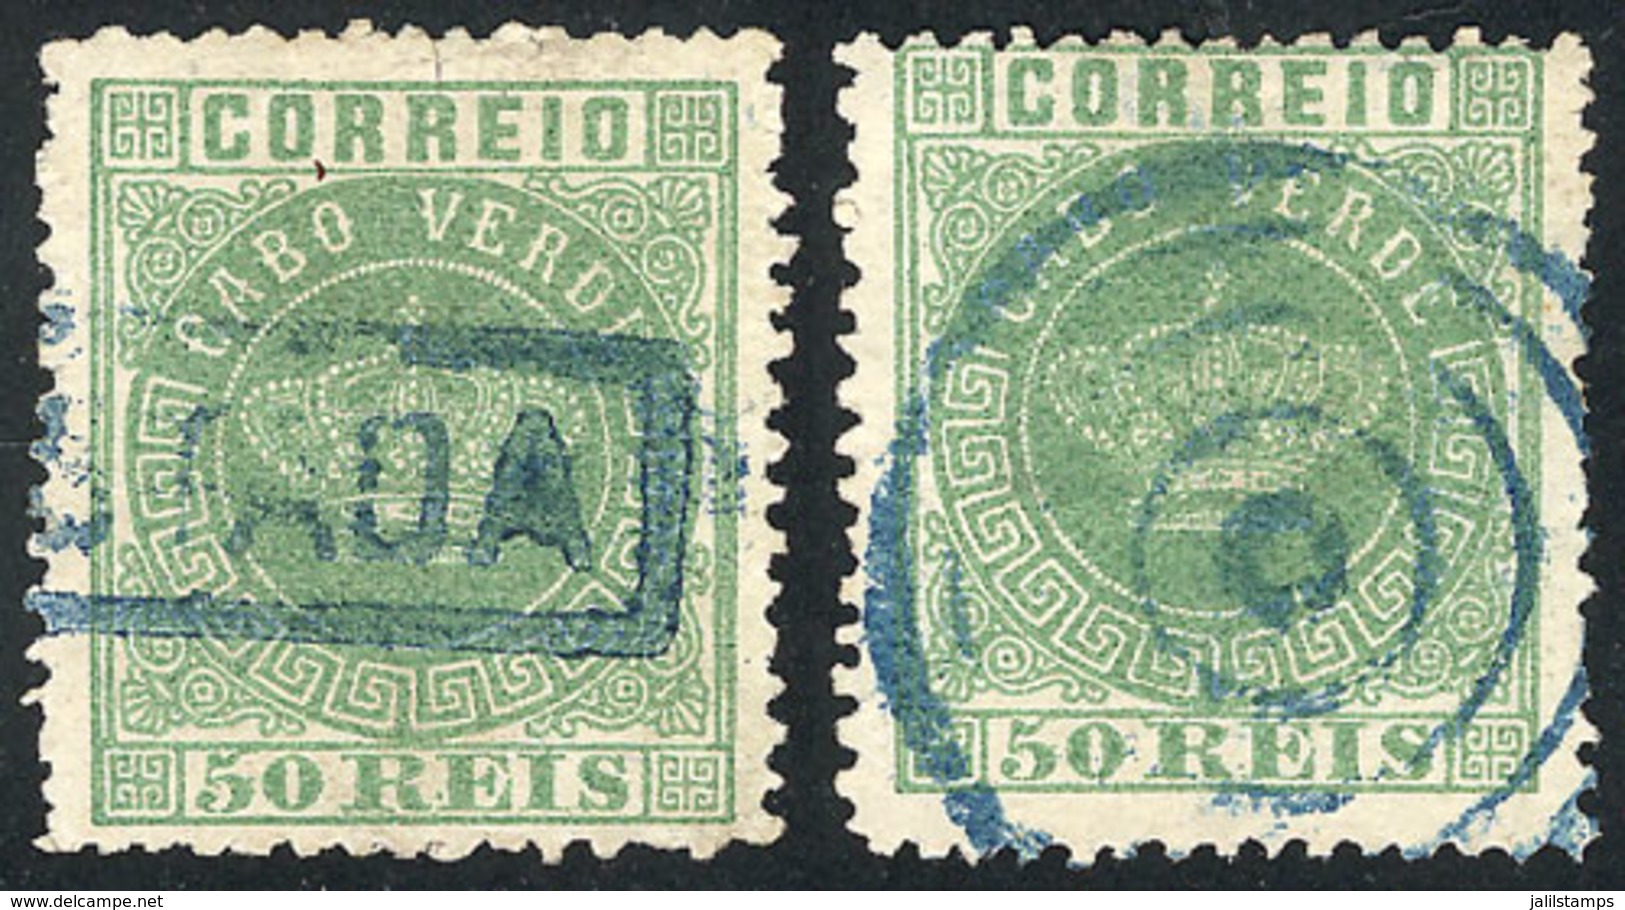 971 CAPE VERDE: Sc.6, 1877 50r. Green, Perf 12½, 2 Used Examples With Different Cancels, Catalogue Value US$145, VF Qual - Kap Verde